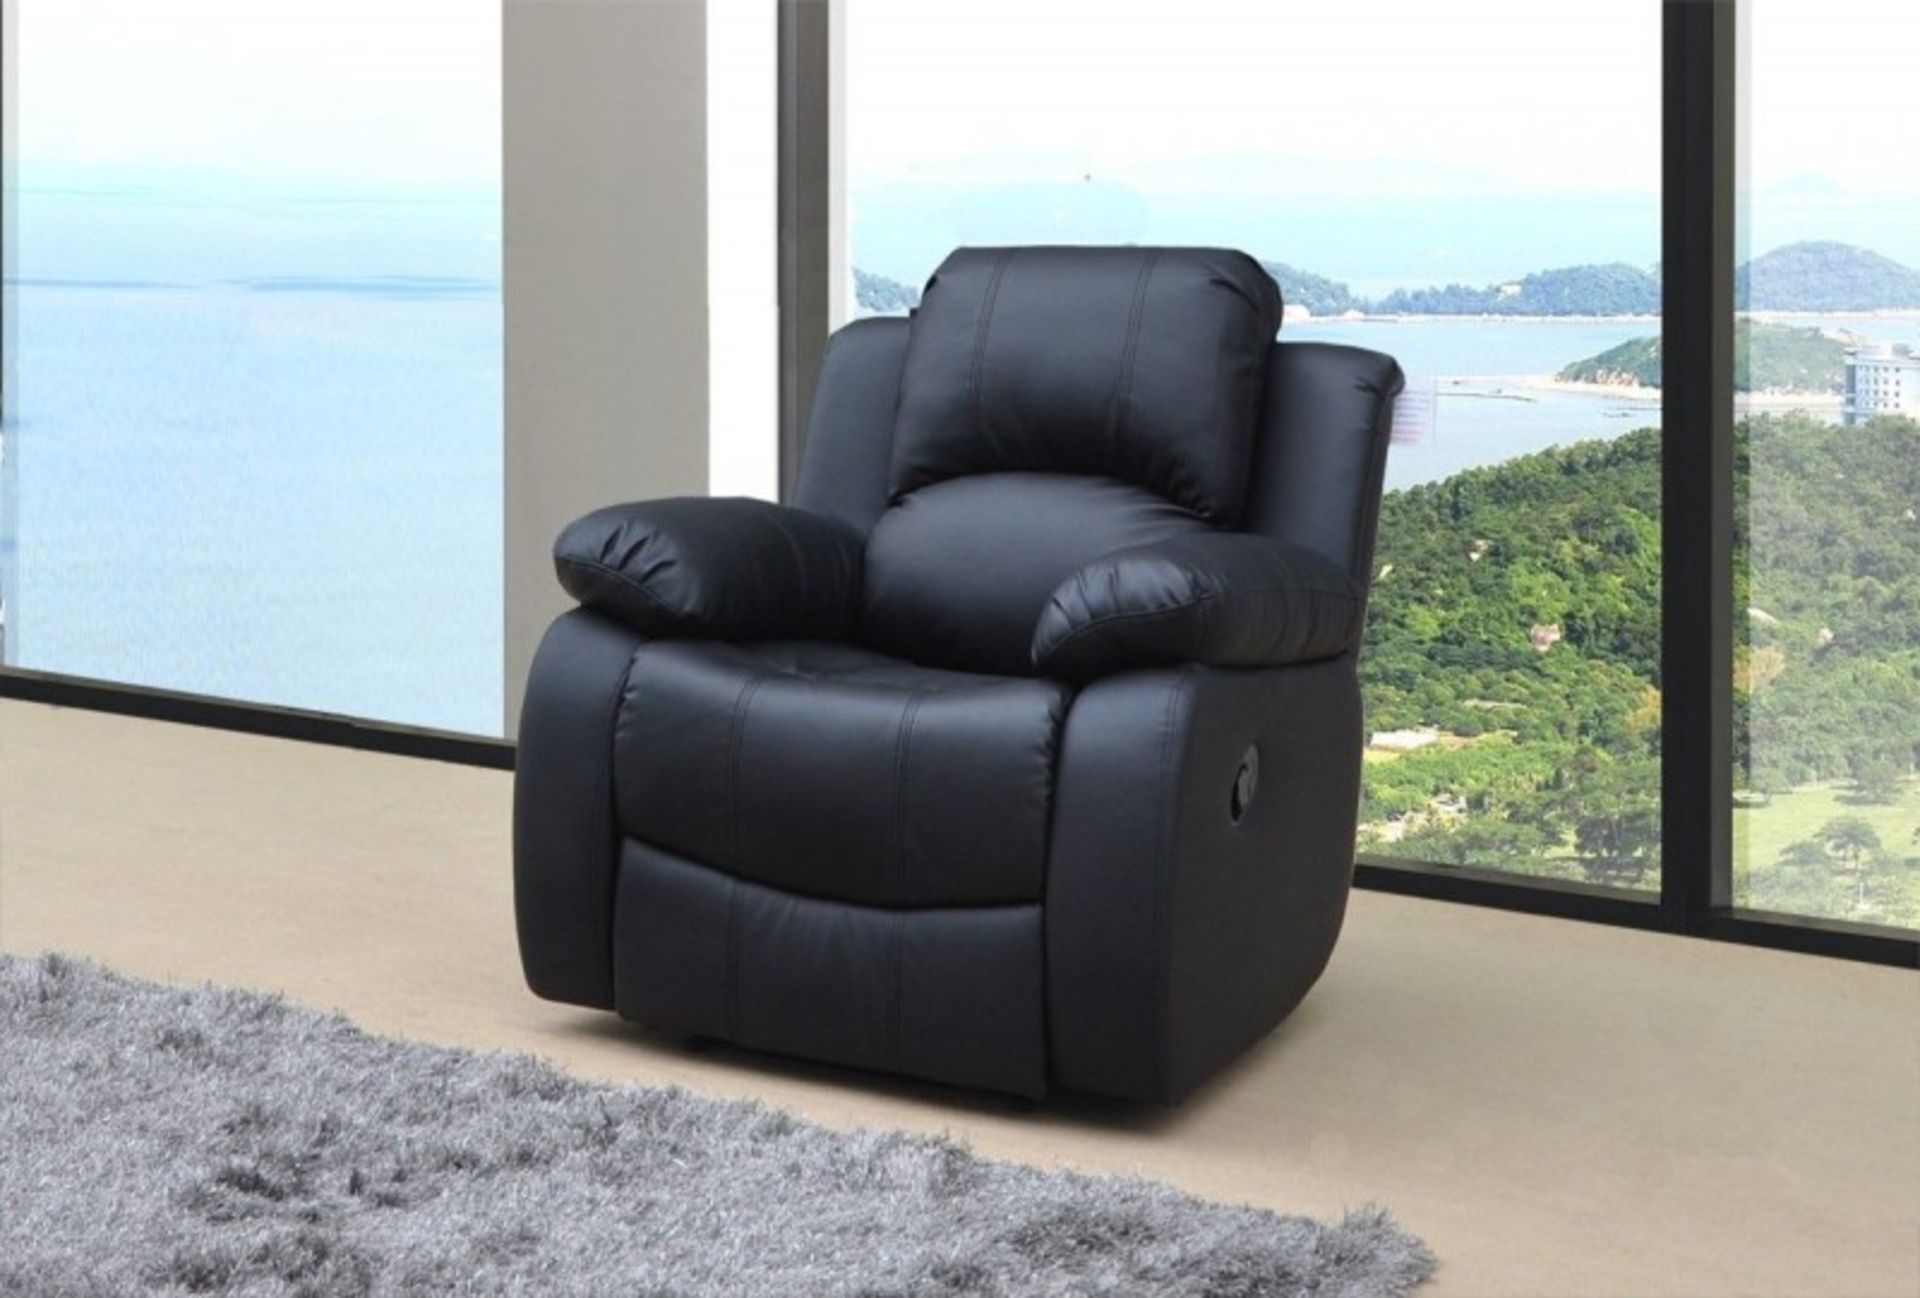 Brand new direct from the manufacturers supreme valance black leather manual reclining arm chair